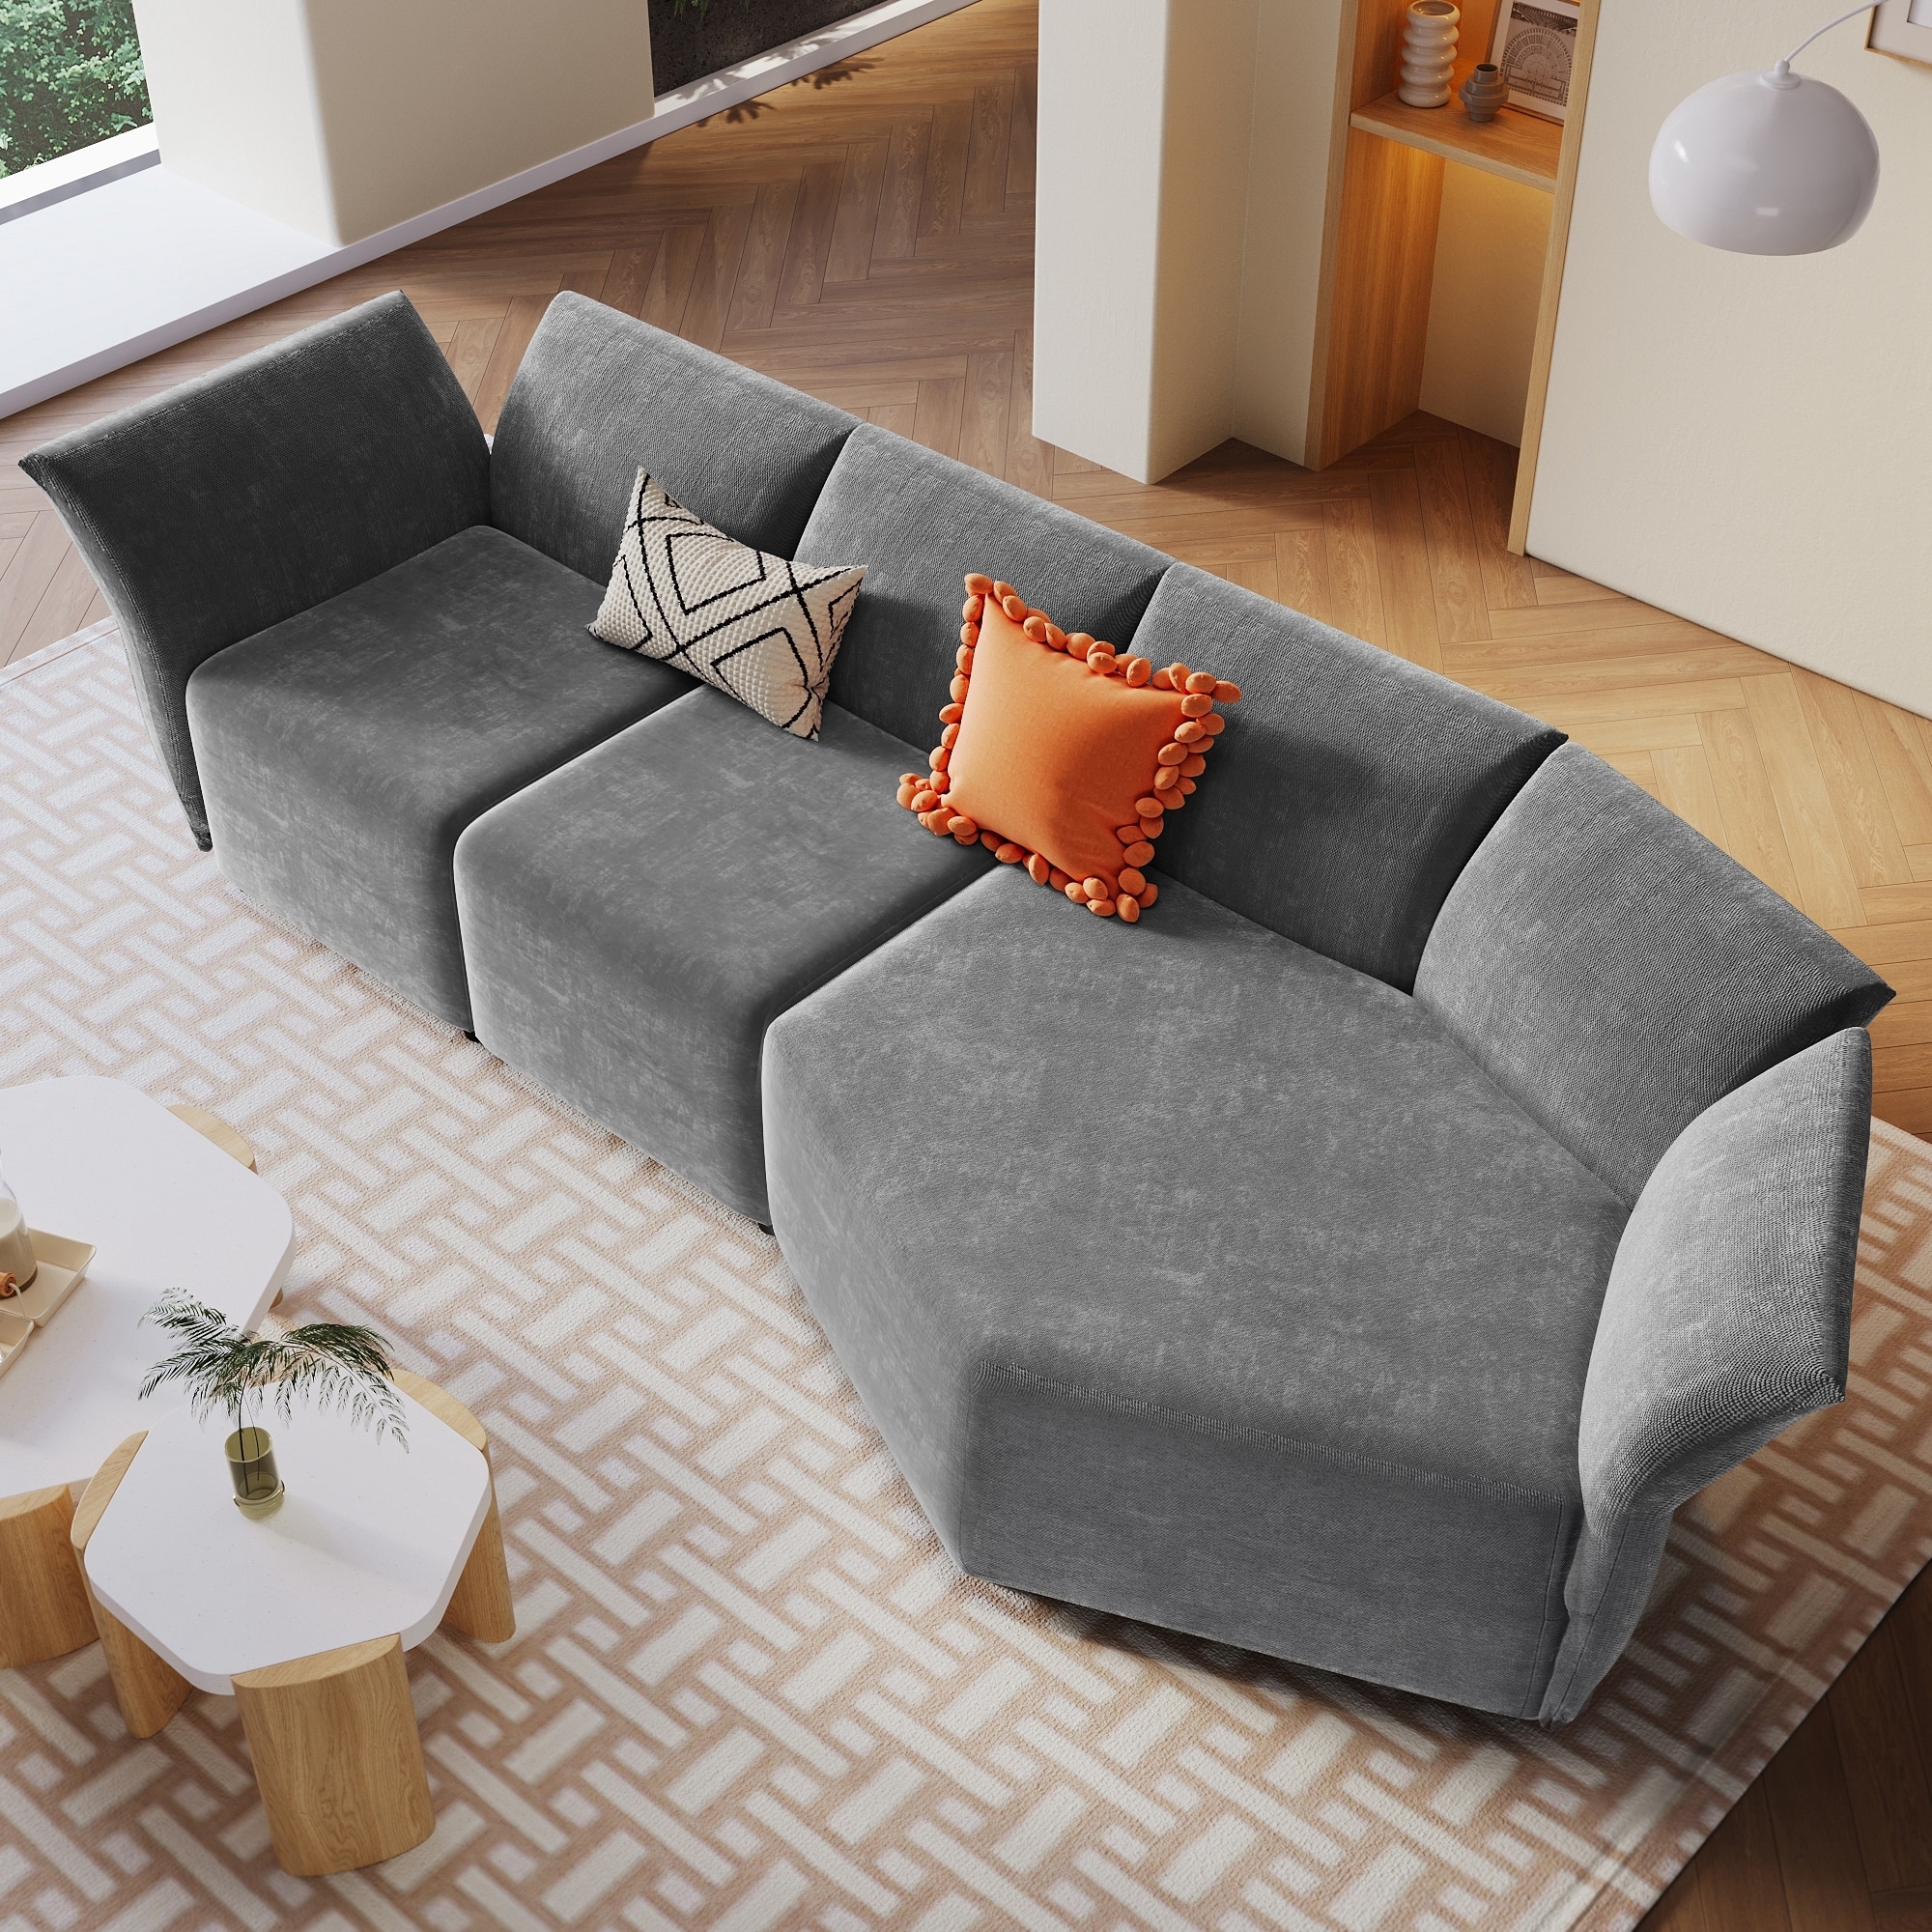 https://ak1.ostkcdn.com/images/products/is/images/direct/ac79eb6c640e8f06fe03aac44f2572bda5b57ad7/Polyester-Upholstery-Sofa-Set-with-Adjustable-Back-with-Free-Combination.jpg